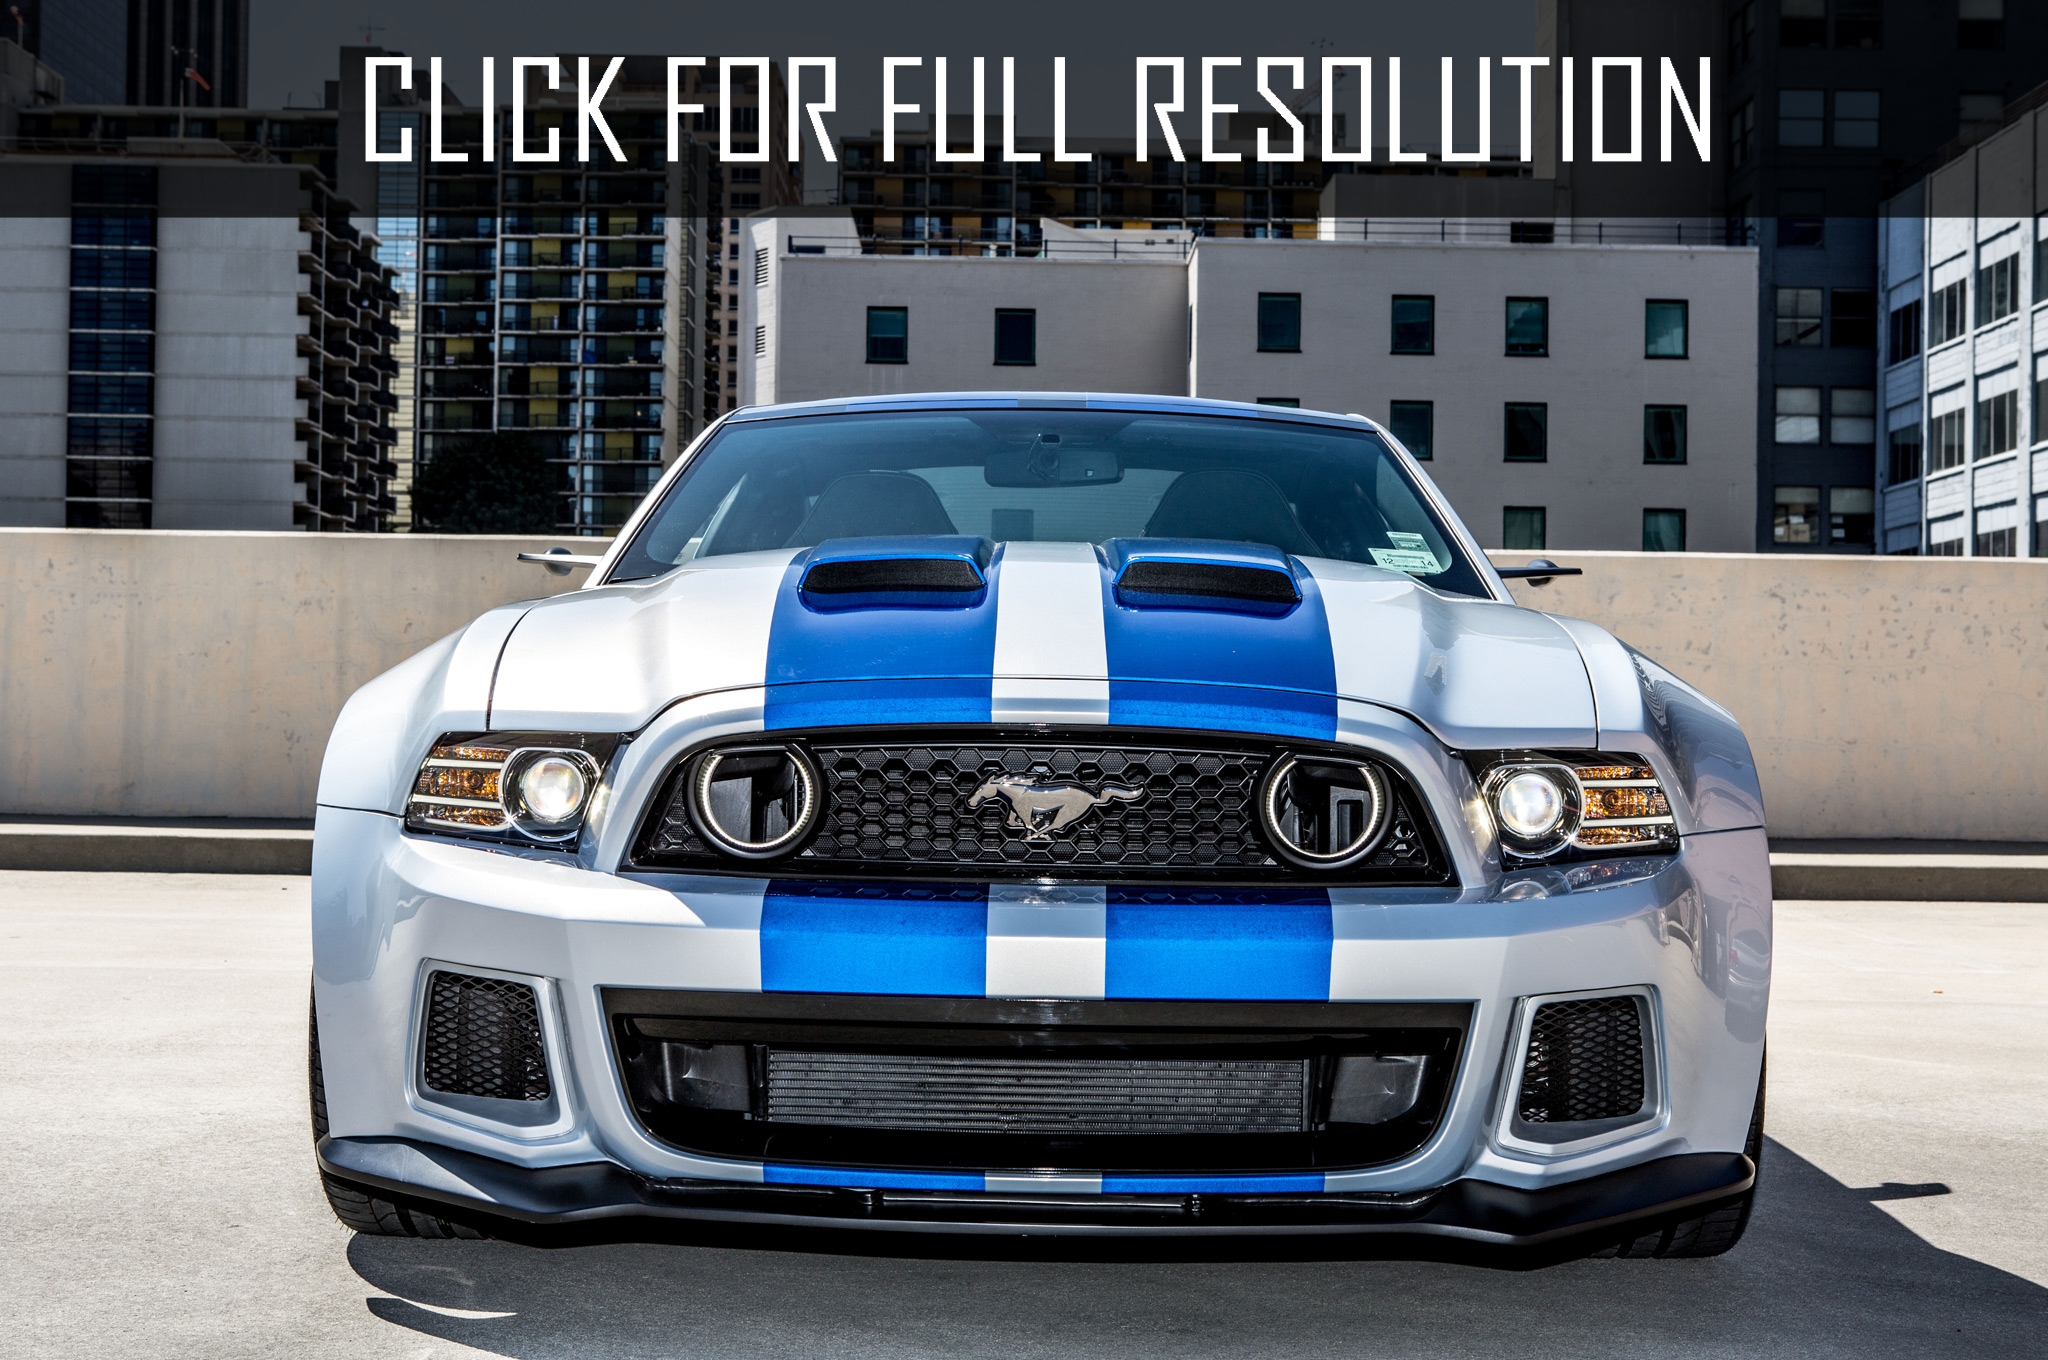 Ford Mustang GT 2014